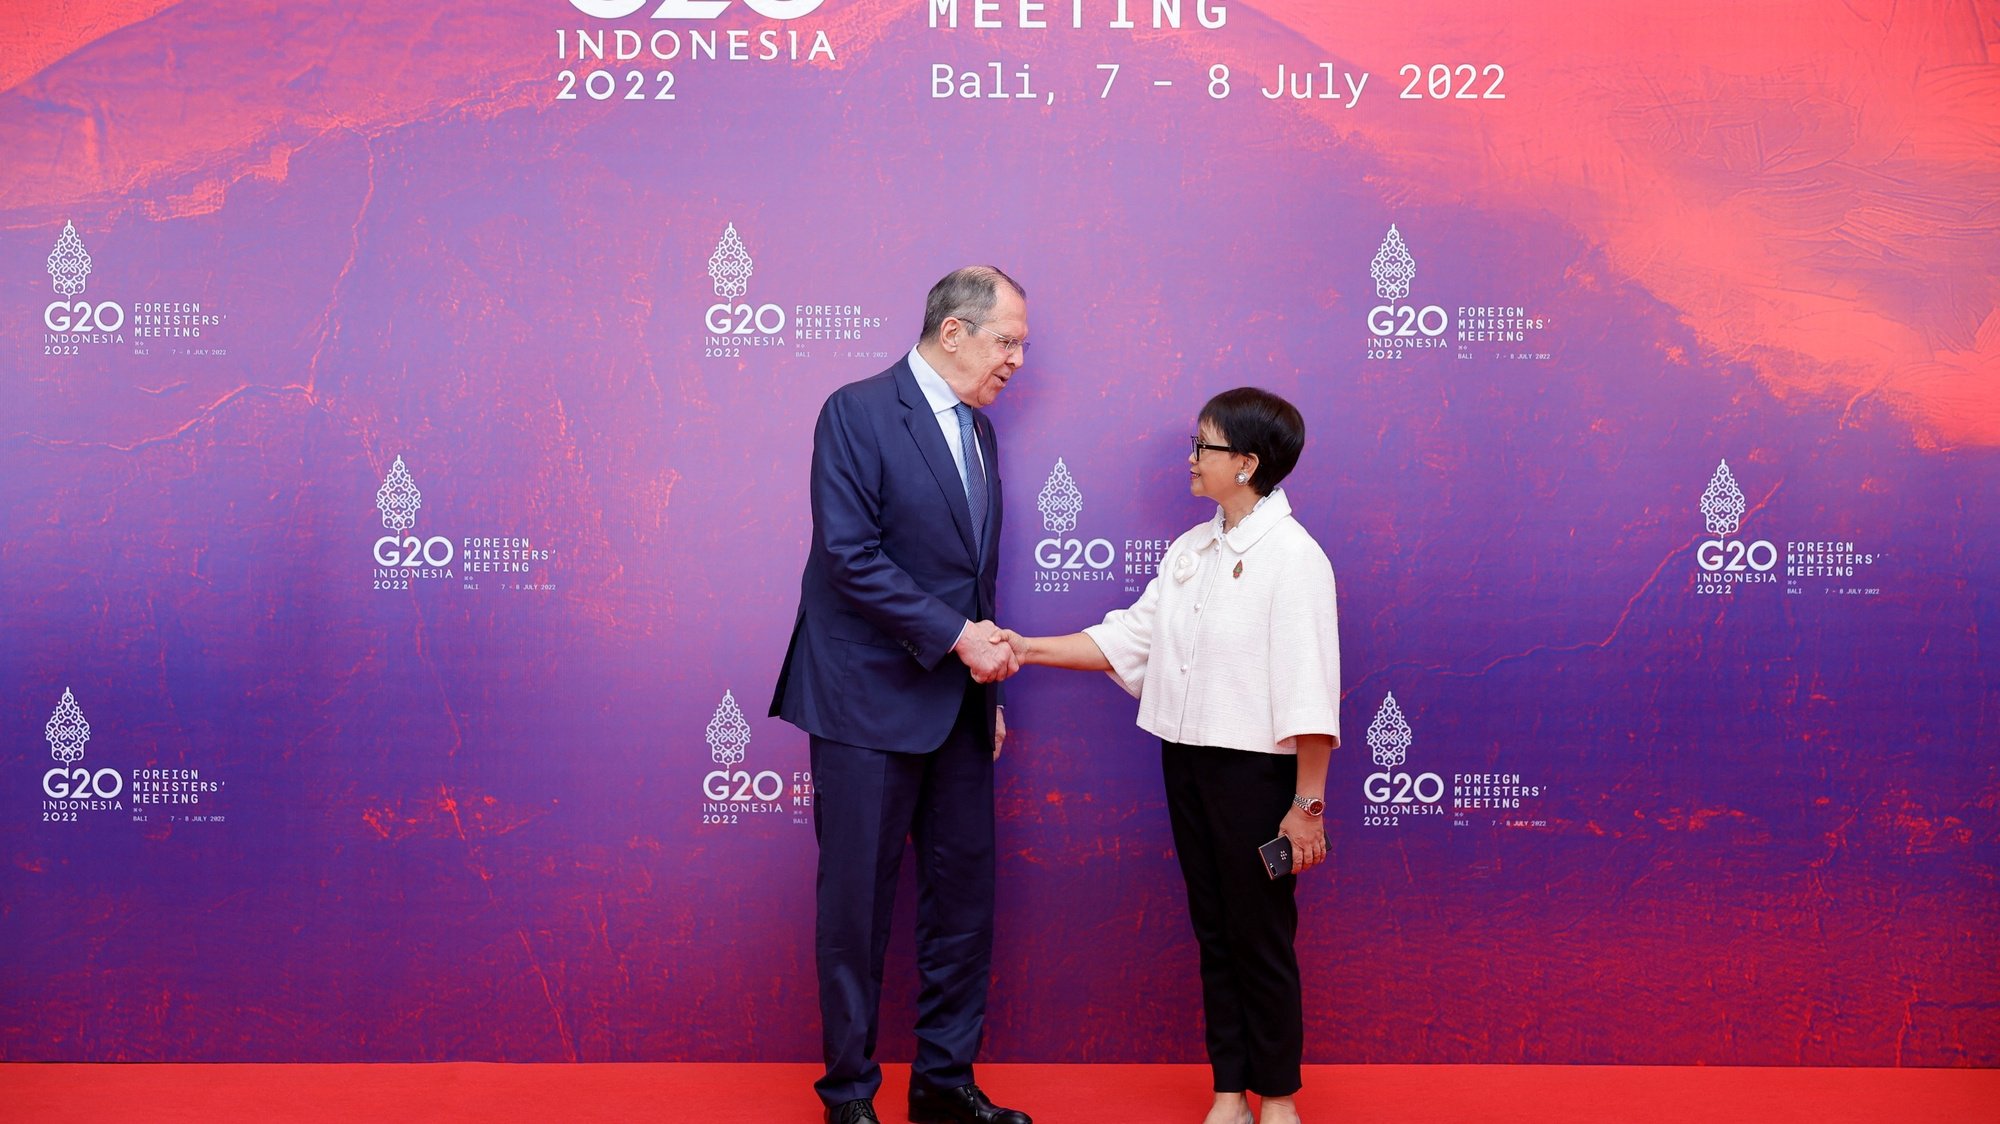 epa10058392 Indonesia’s Foreign Minister Retno Marsudi (R) welcomes Russia’s Foreign Minister Sergei Lavrov (L) during the G20 Foreign Ministers’ Meeting in Nusa Dua, Bali, Indonesia, 08 July 2022. Bali hosts the two-day G20 Foreign Ministers Meeting from 07 to 08 July 2022.  EPA/WILLY KURNIAWAN / POOL